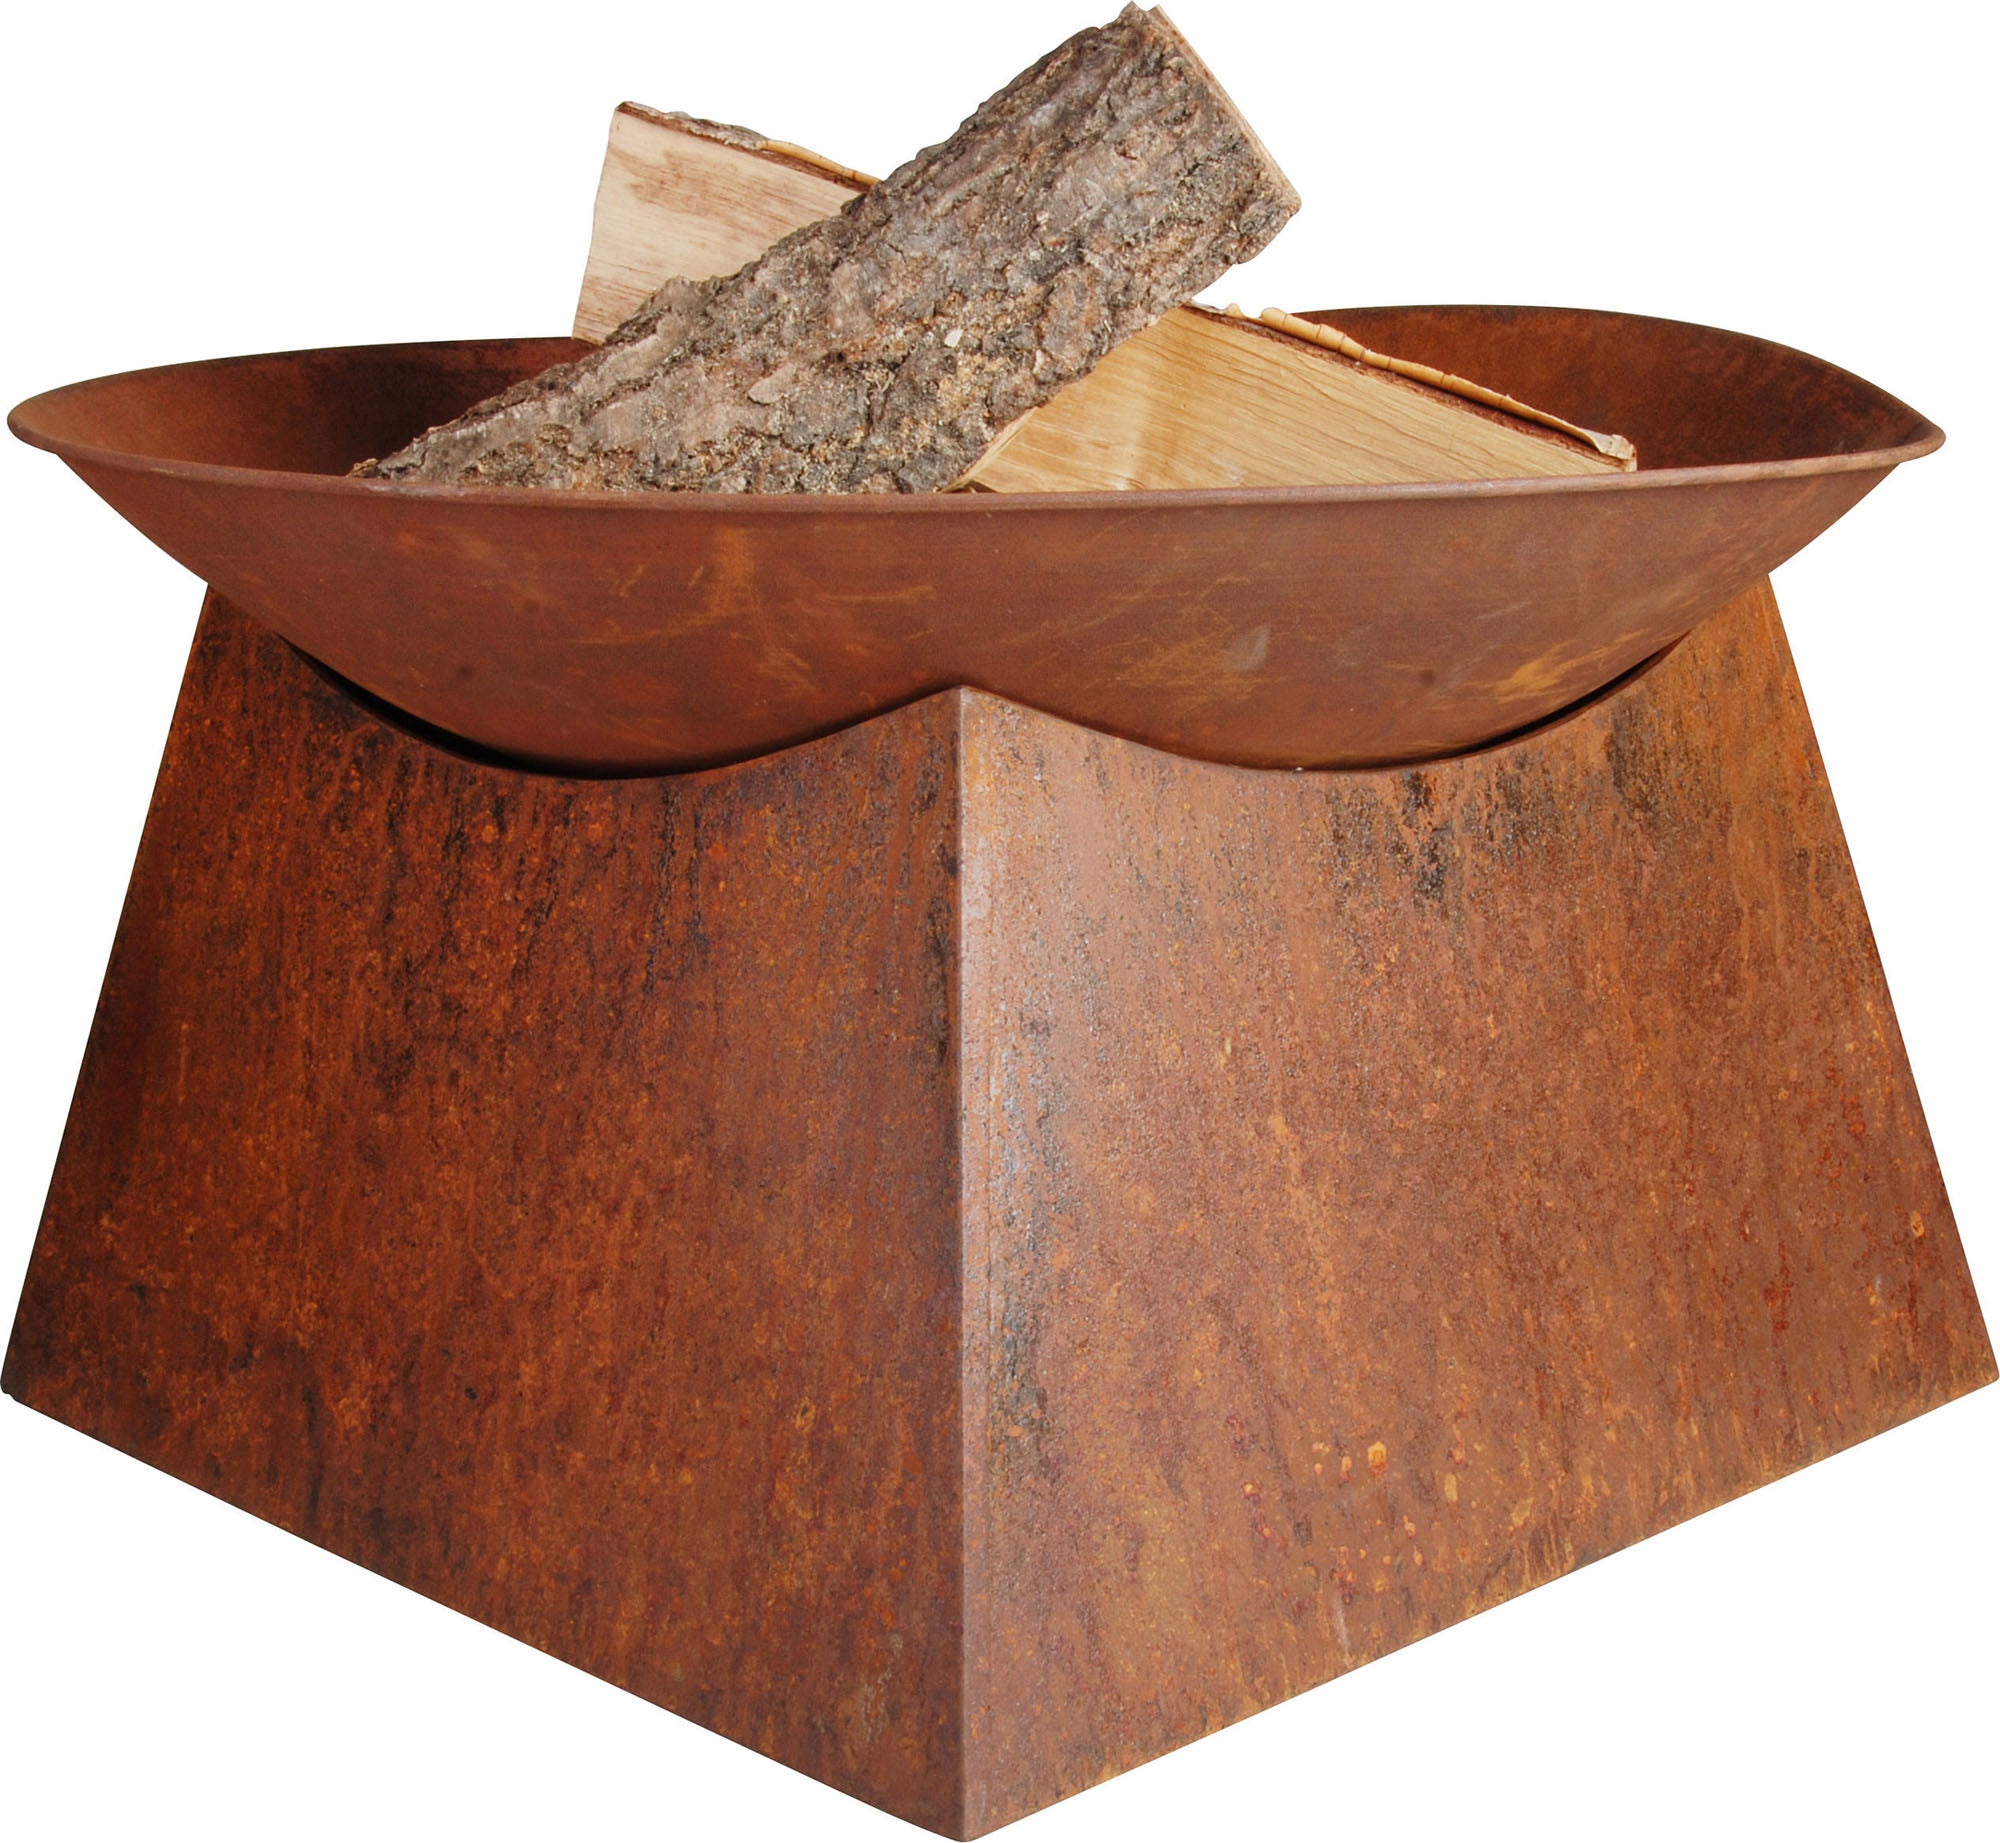 RUSTIC SQUARE ROUND FIRE BOWL WITH BASE